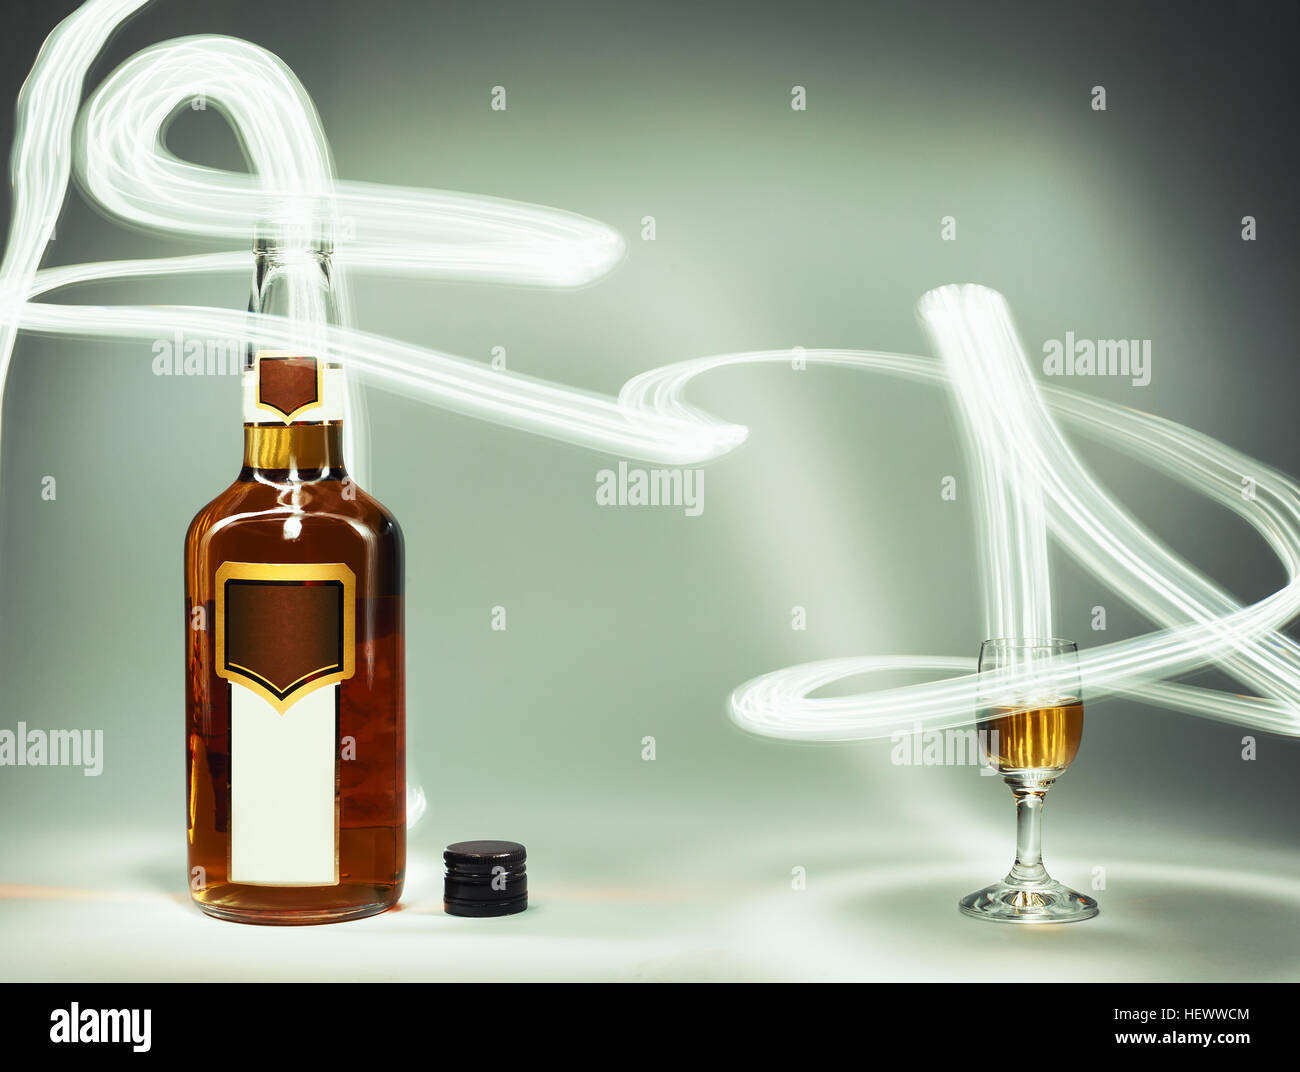 Conceptual composition of alcoholic drinks, full brandy bottle and a glass and lighting effects. Stock Photo